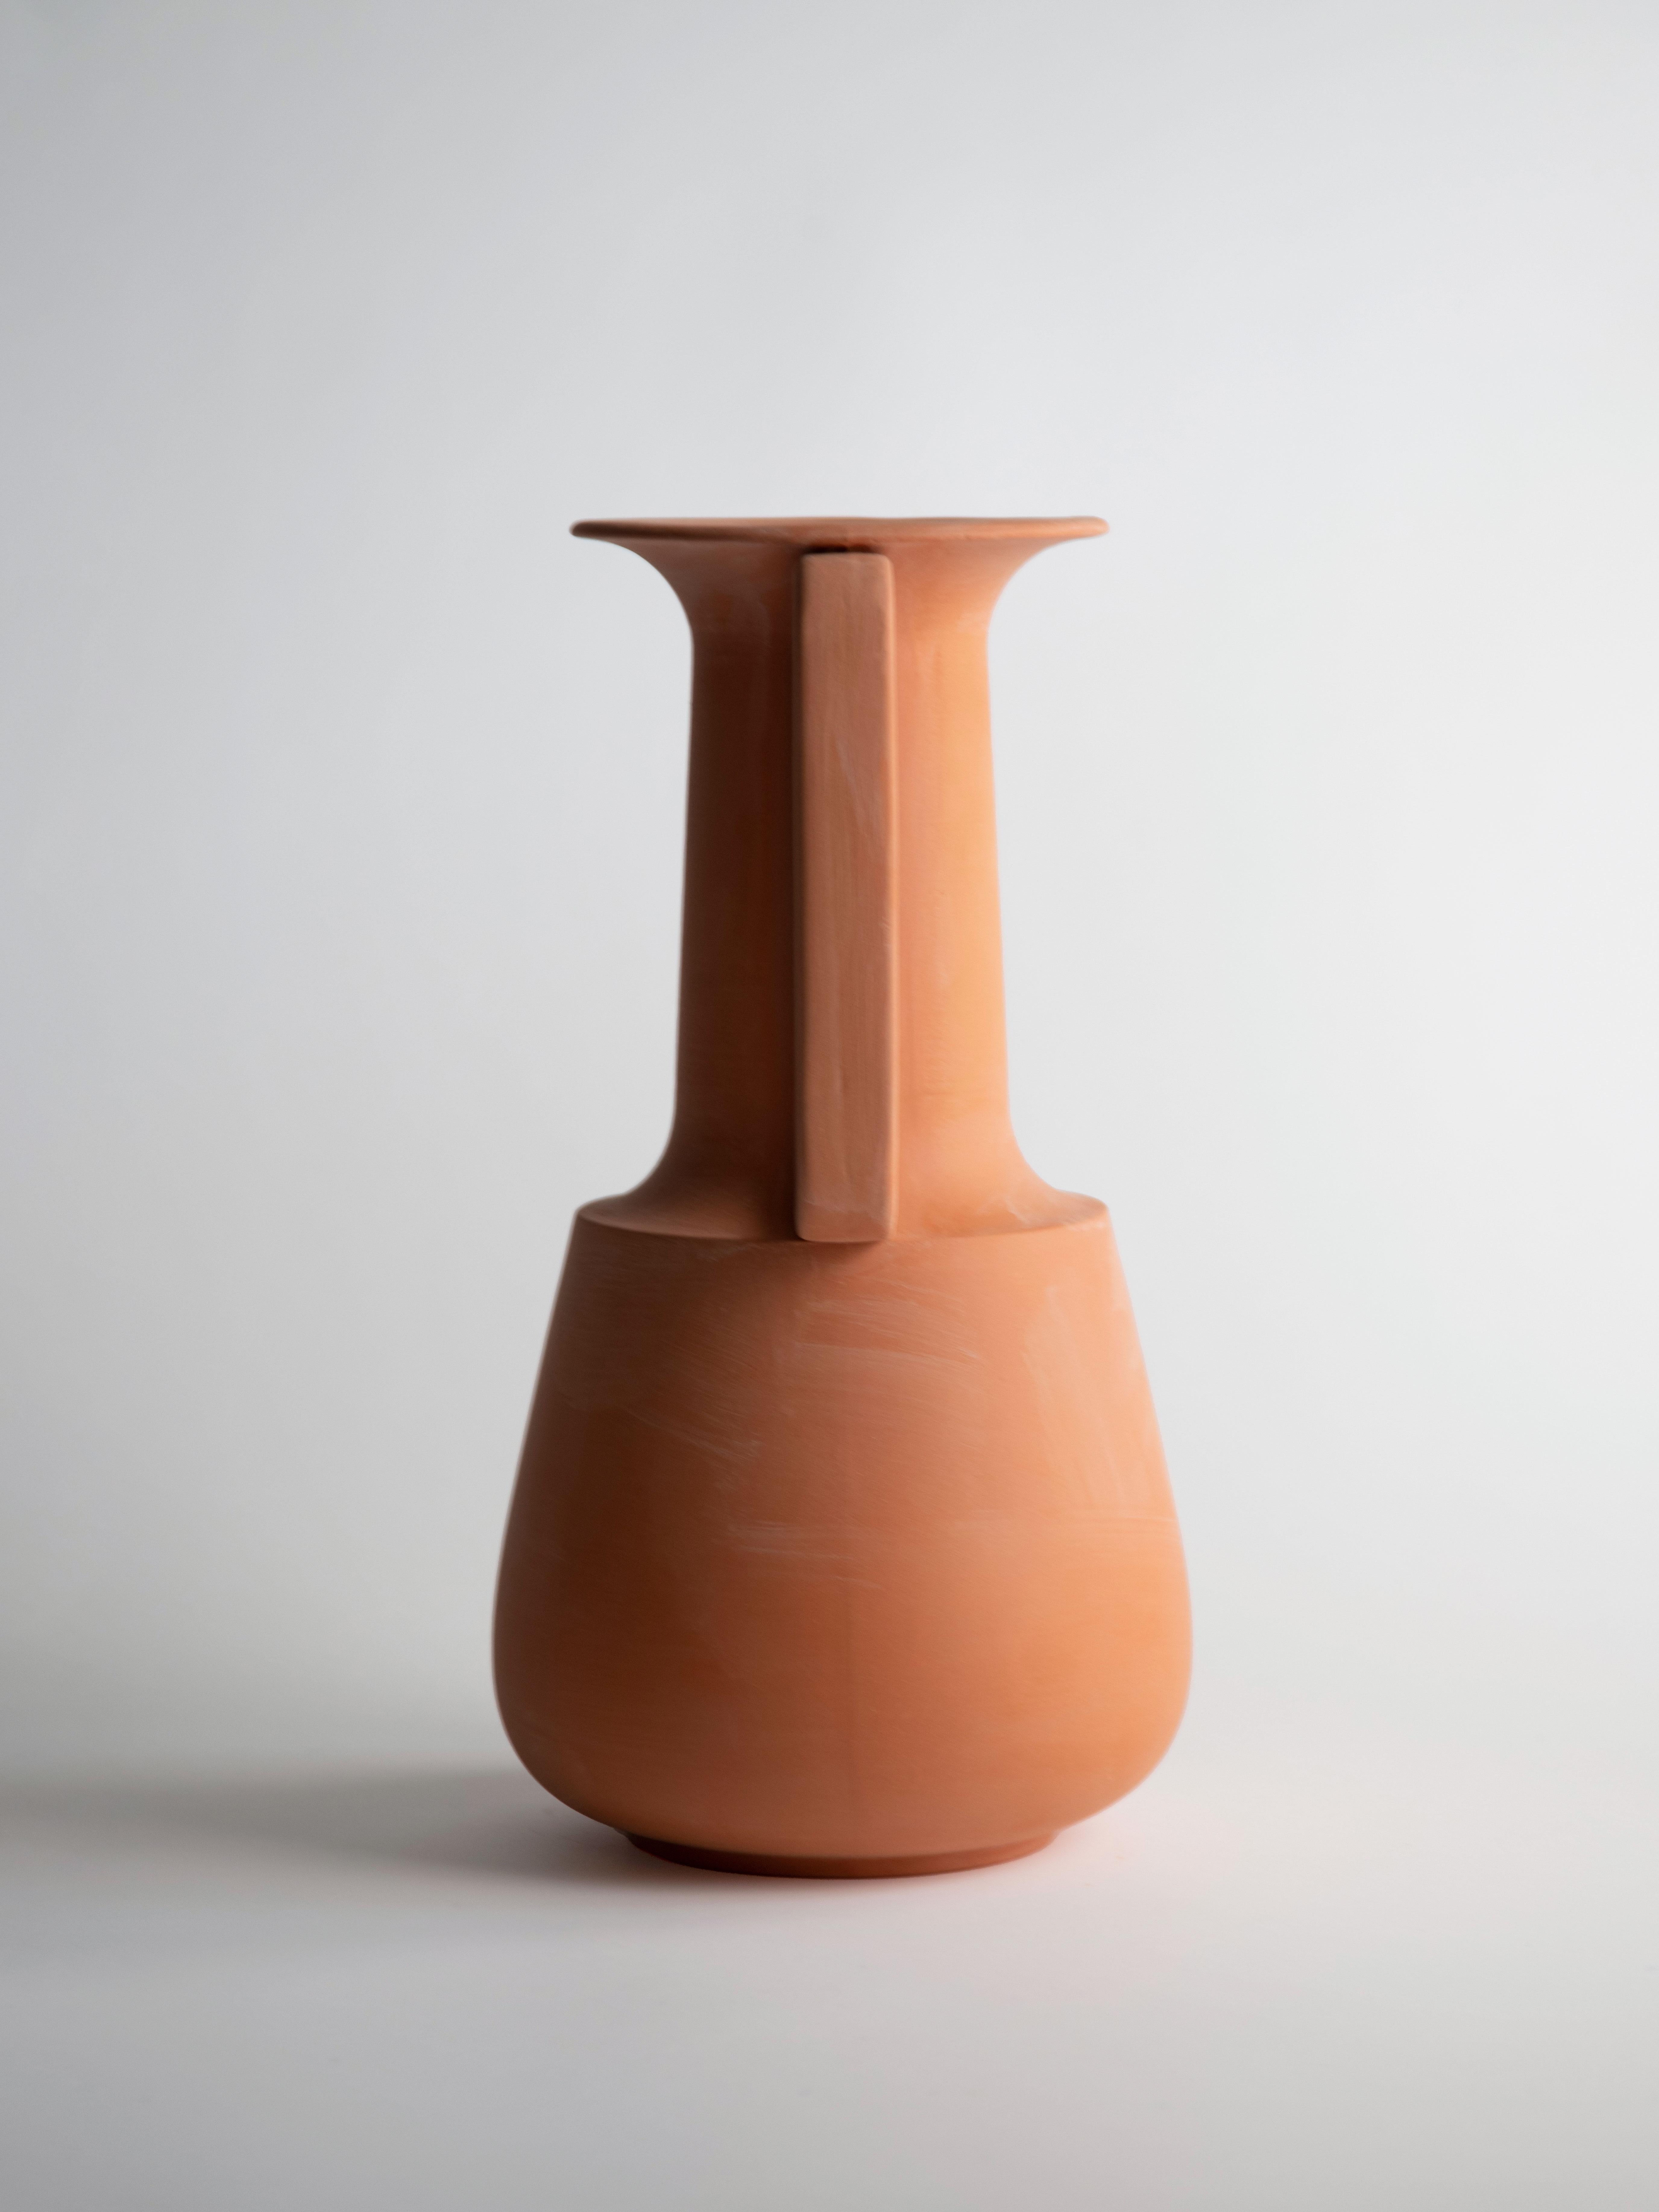 Cannate 1 Pot by Secondome Edizioni
Designer: Giulio Iacchetti.
Dimensions: Ø 27 x H 37 cm.
Materials: Clay. 

Collection / Production: Secondome. Available in different shapes. Please contact us.

THE GALLERY
Secondome is a Design Gallery focused